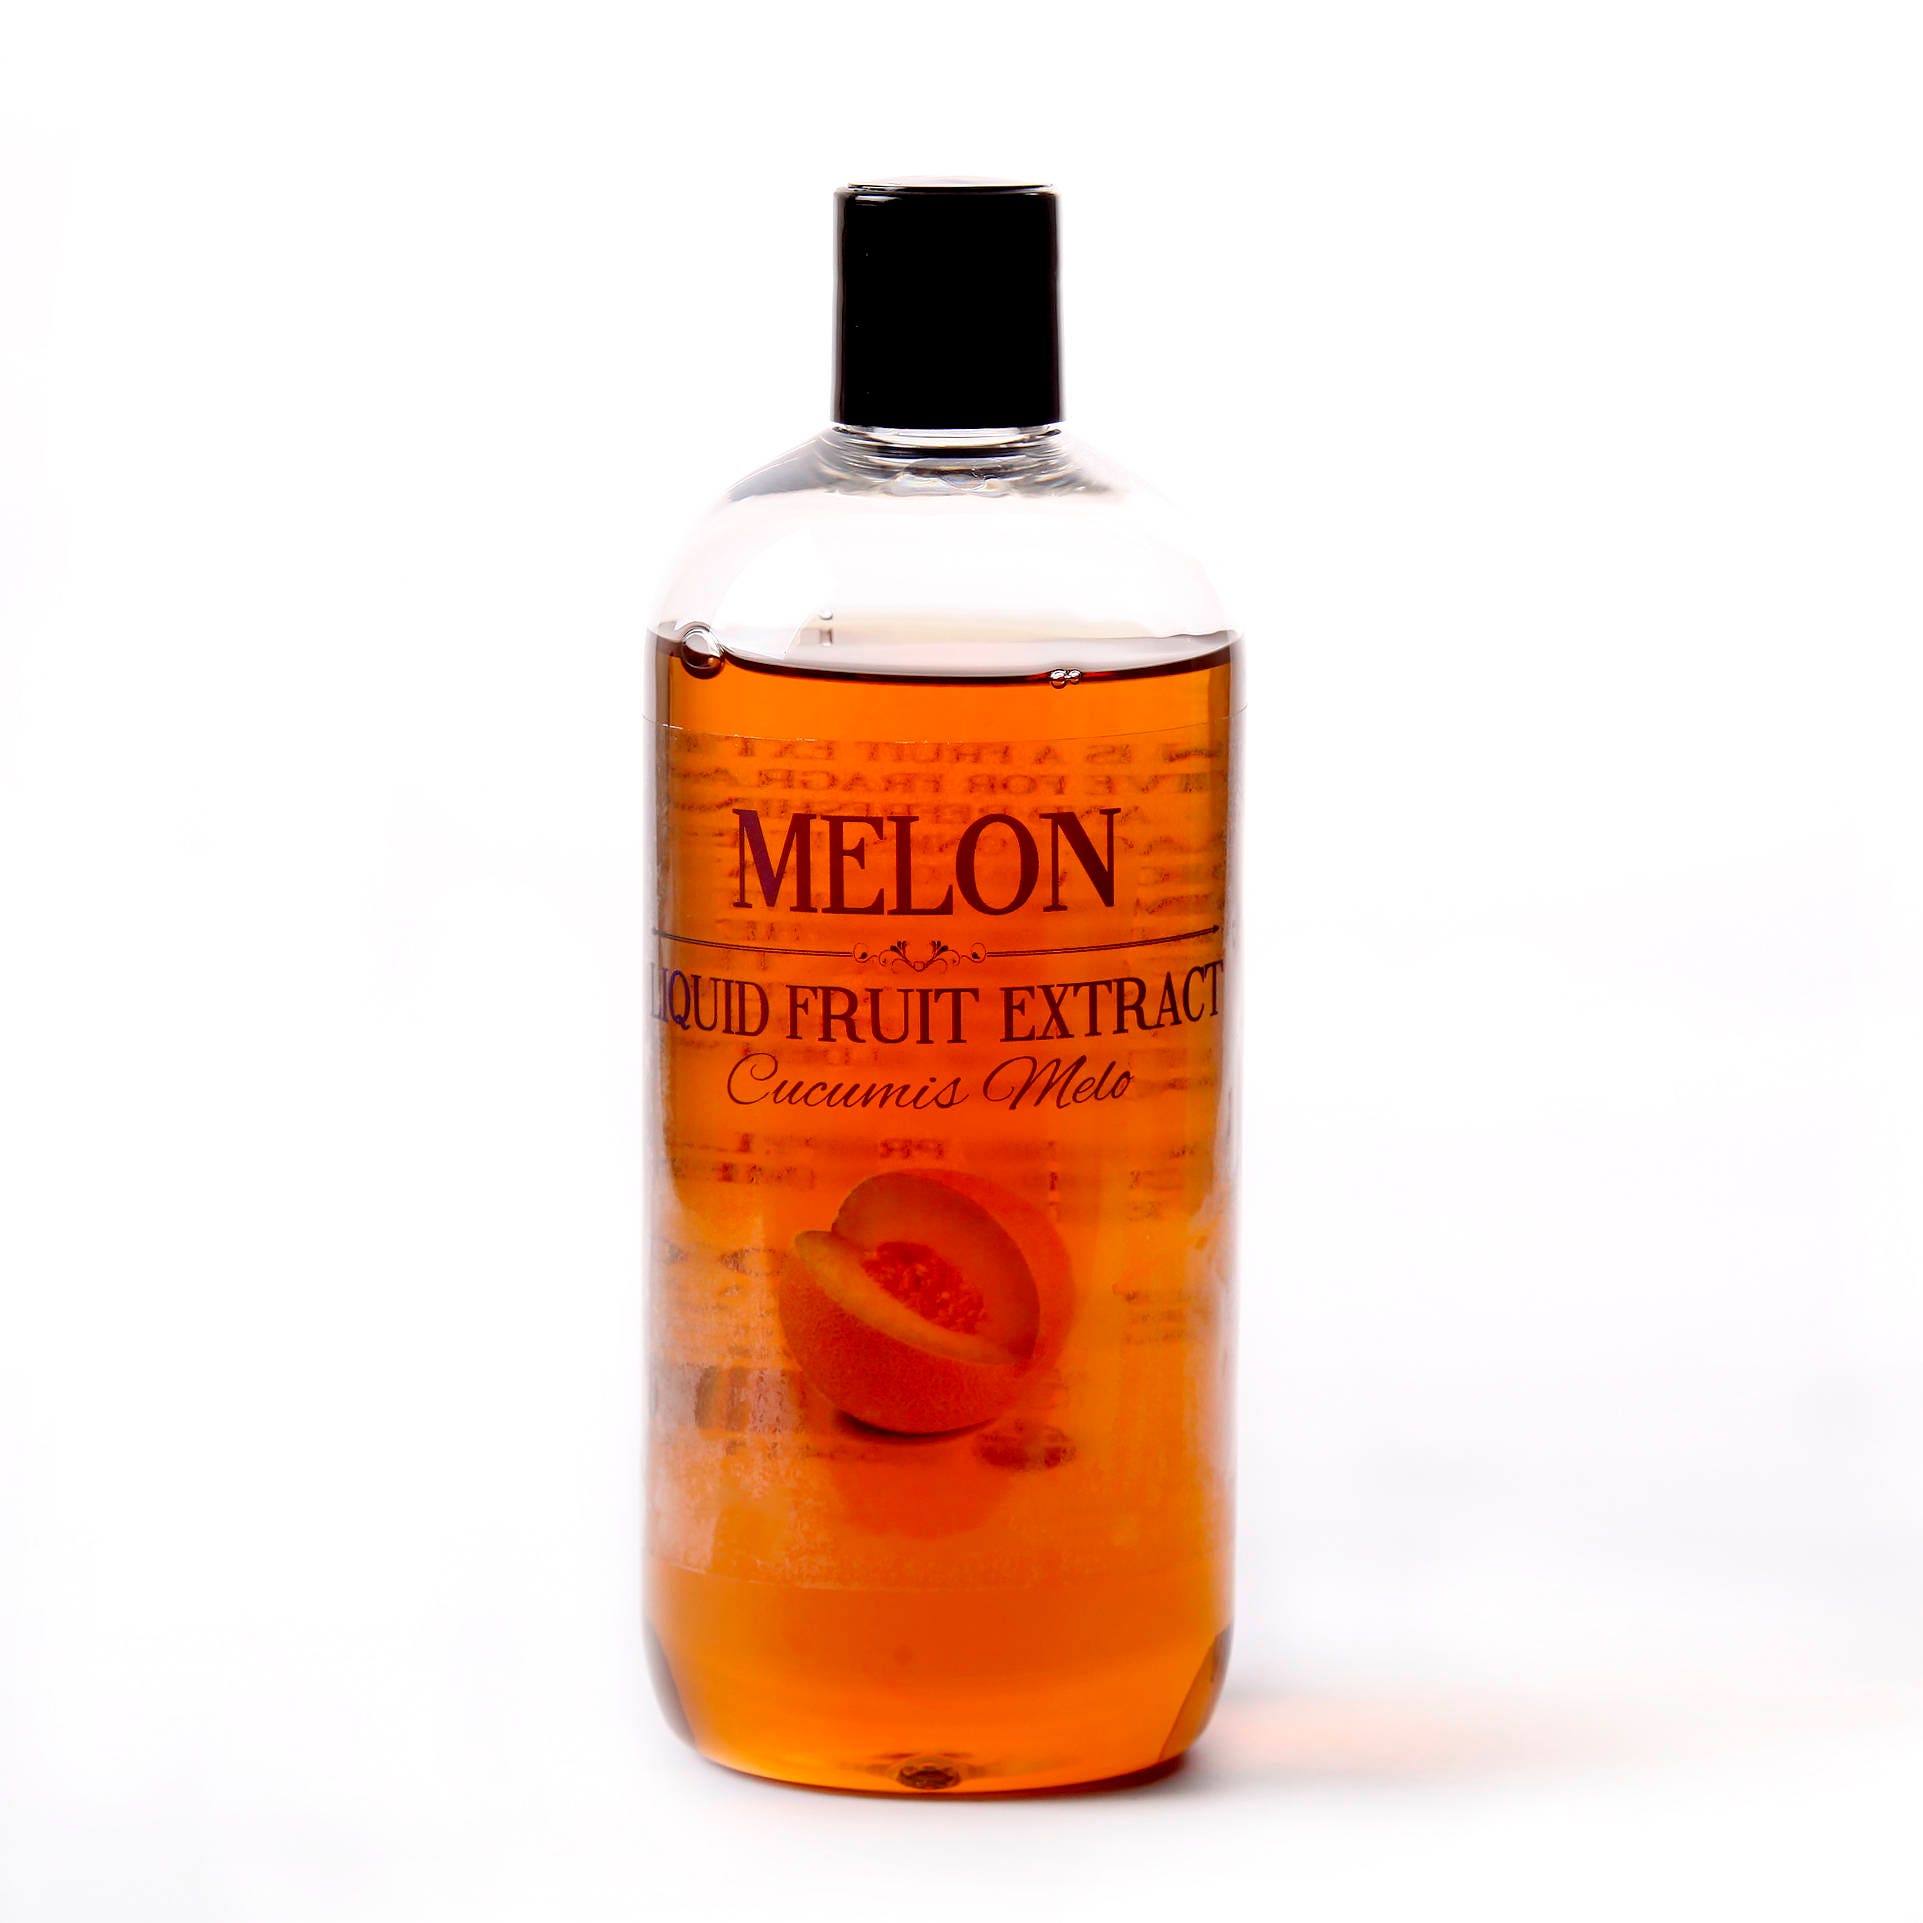  Mystic Moments Melon Liquid Fruit Extract 10g : Beauty &  Personal Care